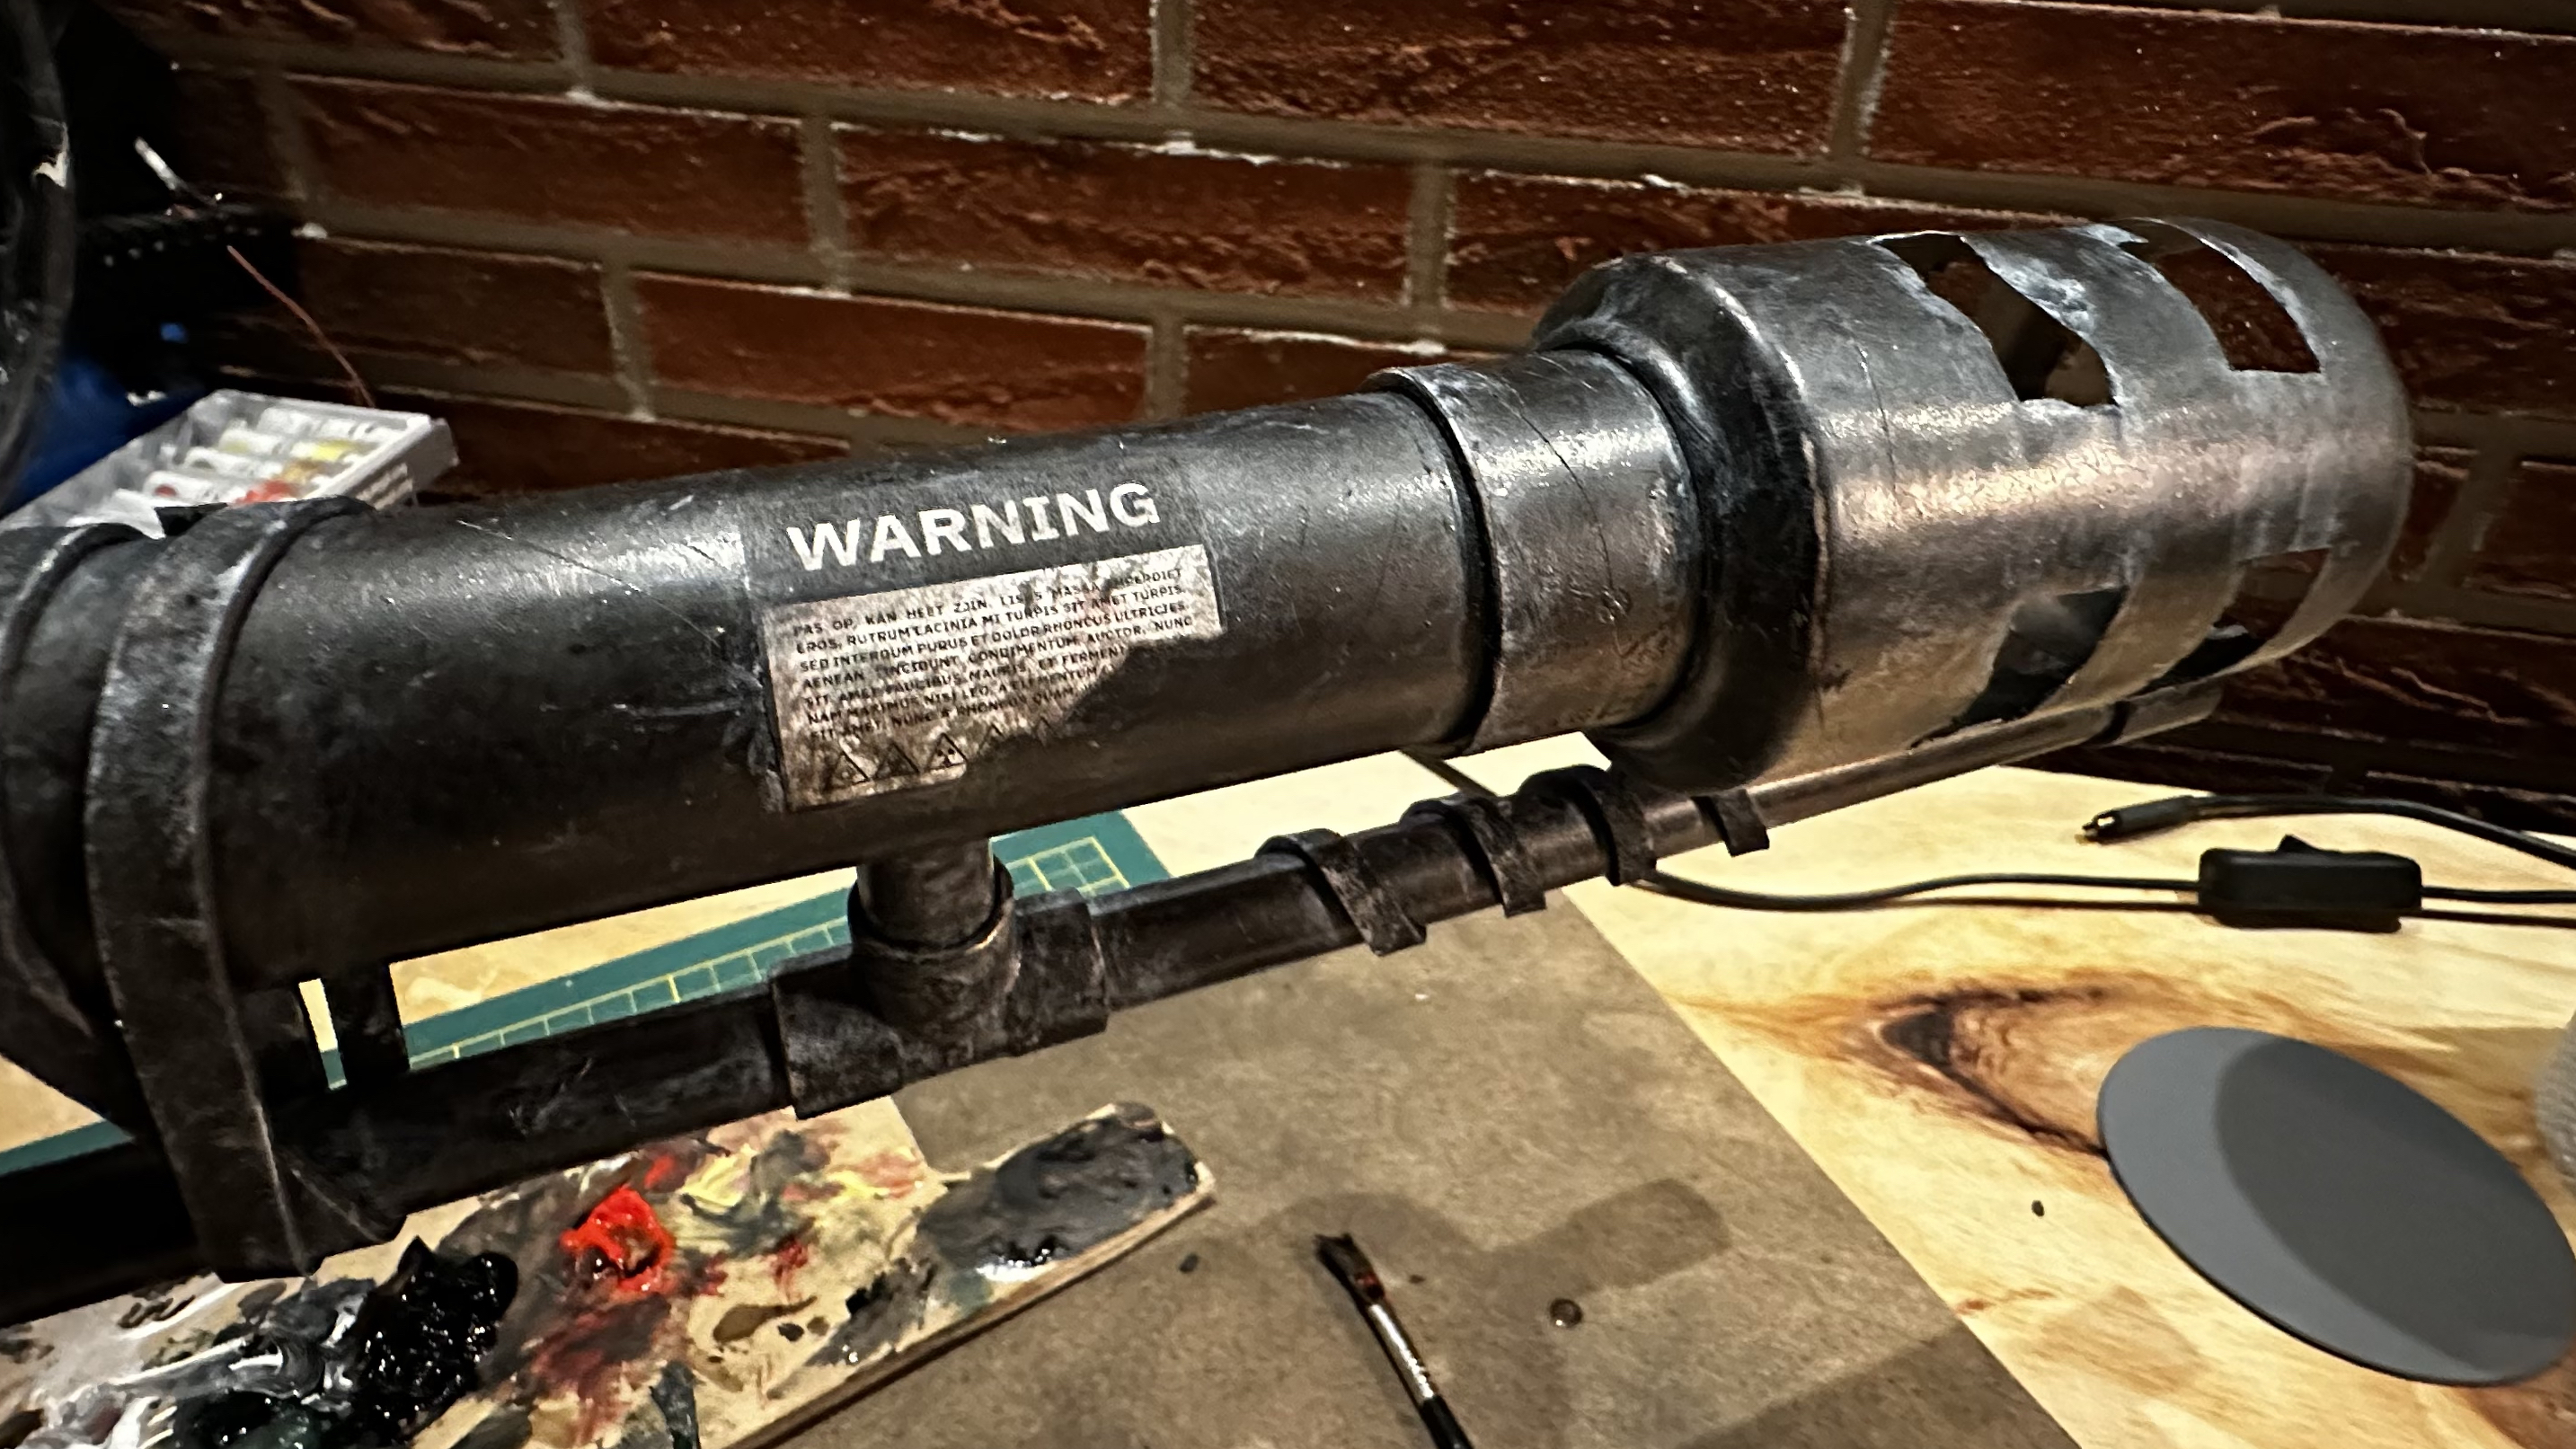 Detailed photo of the front part OF THE MOCK FLAMETHROWER